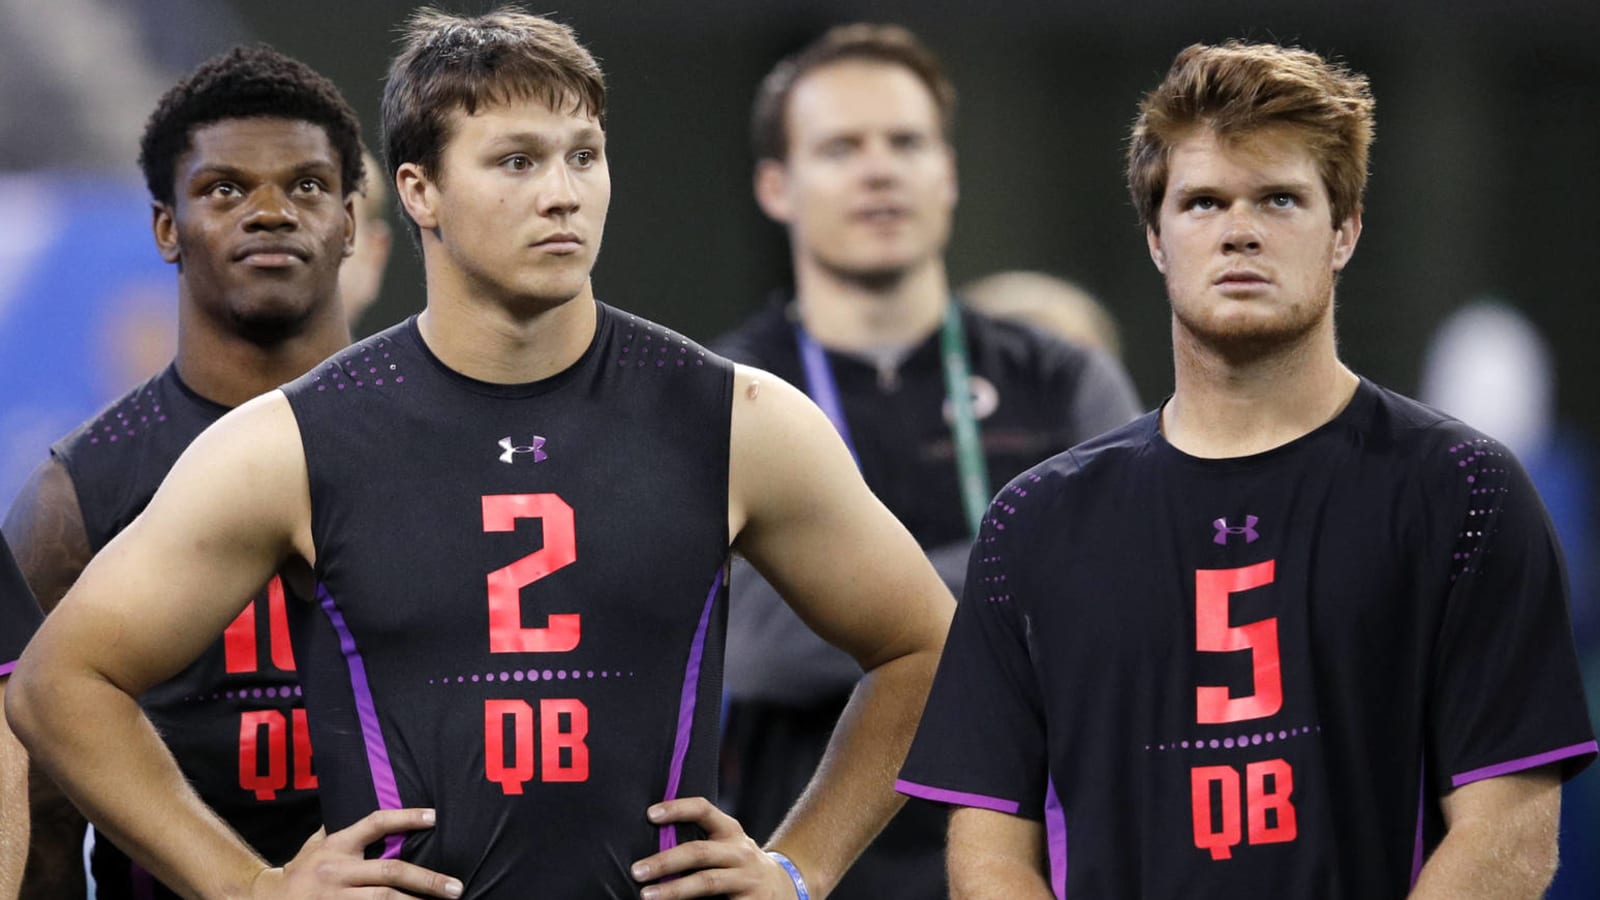 There is no more waiting around for a QB in the NFL Draft